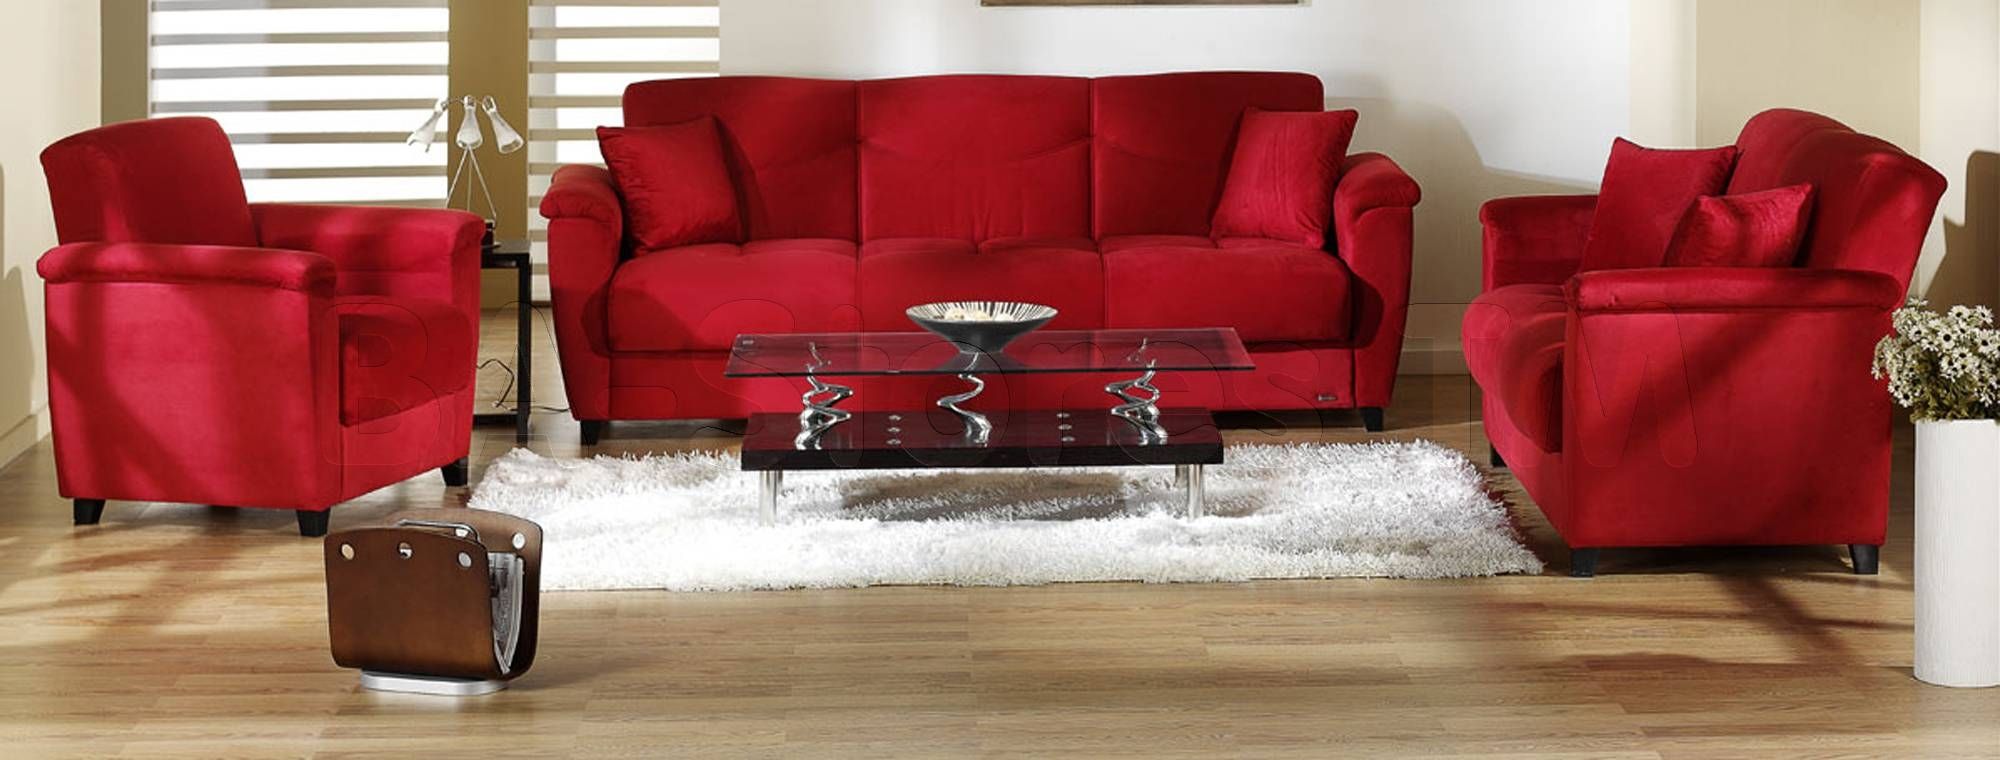 Red Sofa Decor Images Of Photo Albums Red Living Room Furniture With Regard To Red Sofa Chairs (Photo 9 of 30)